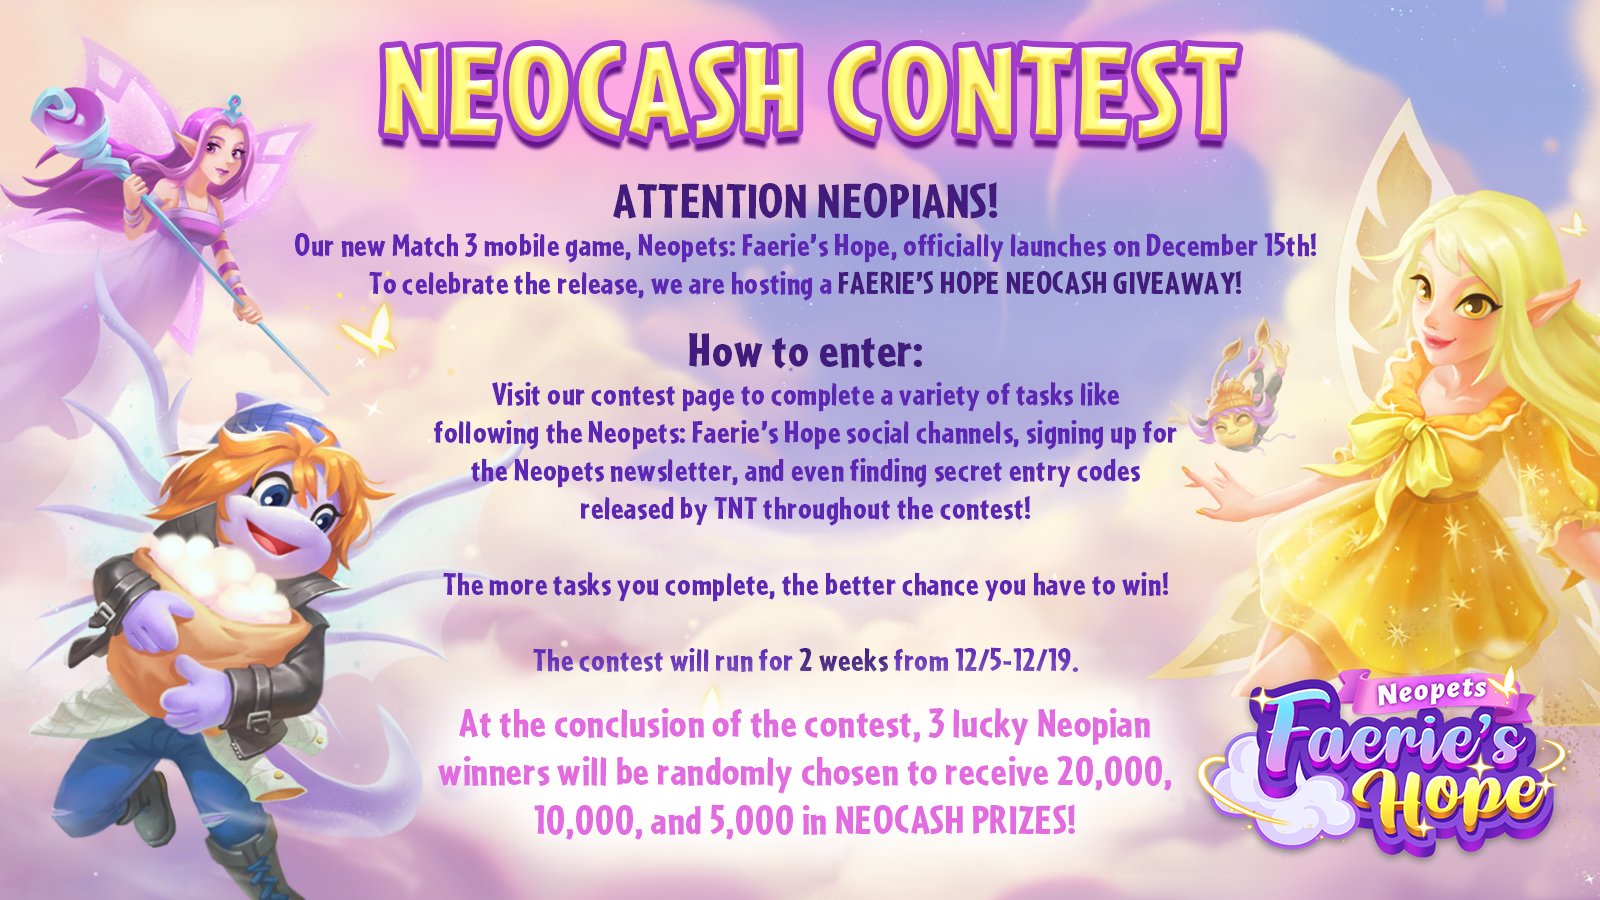 🚨ATTENTION NEOPIANS! 🚨

Our new Match 3 mobile game, Neopets: Faerie’s Hope, officially launches on December 15th! 🧚

To celebrate the release, we are hosting a FAERIE’S HOPE NEOCASH GIVEAWAY! 🎉

How to enter:

Visit our contest page to complete a variety of tasks like following the Neopets: Faerie’s Hope social channels, signing up for the Neopets newsletter, and even finding 👀 secret entry codes ⁉ released by TNT throughout the contest! ✨

The more tasks you complete, the better chance you have to win! 💰

The contest will run for 2 weeks from 12/5-12/19! 📅

💰💰💰 At the conclusion of the contest, 3 lucky Neopian winners will be randomly chosen to receive 20,000, 10,000, and 5,000 in NEOCASH PRIZES! 💰💰💰

Visit https://gleam.io/competitions/xkQ5W-neopets-faeries-hope-neocash-giveaway to enter and for all the rules! 🧚
